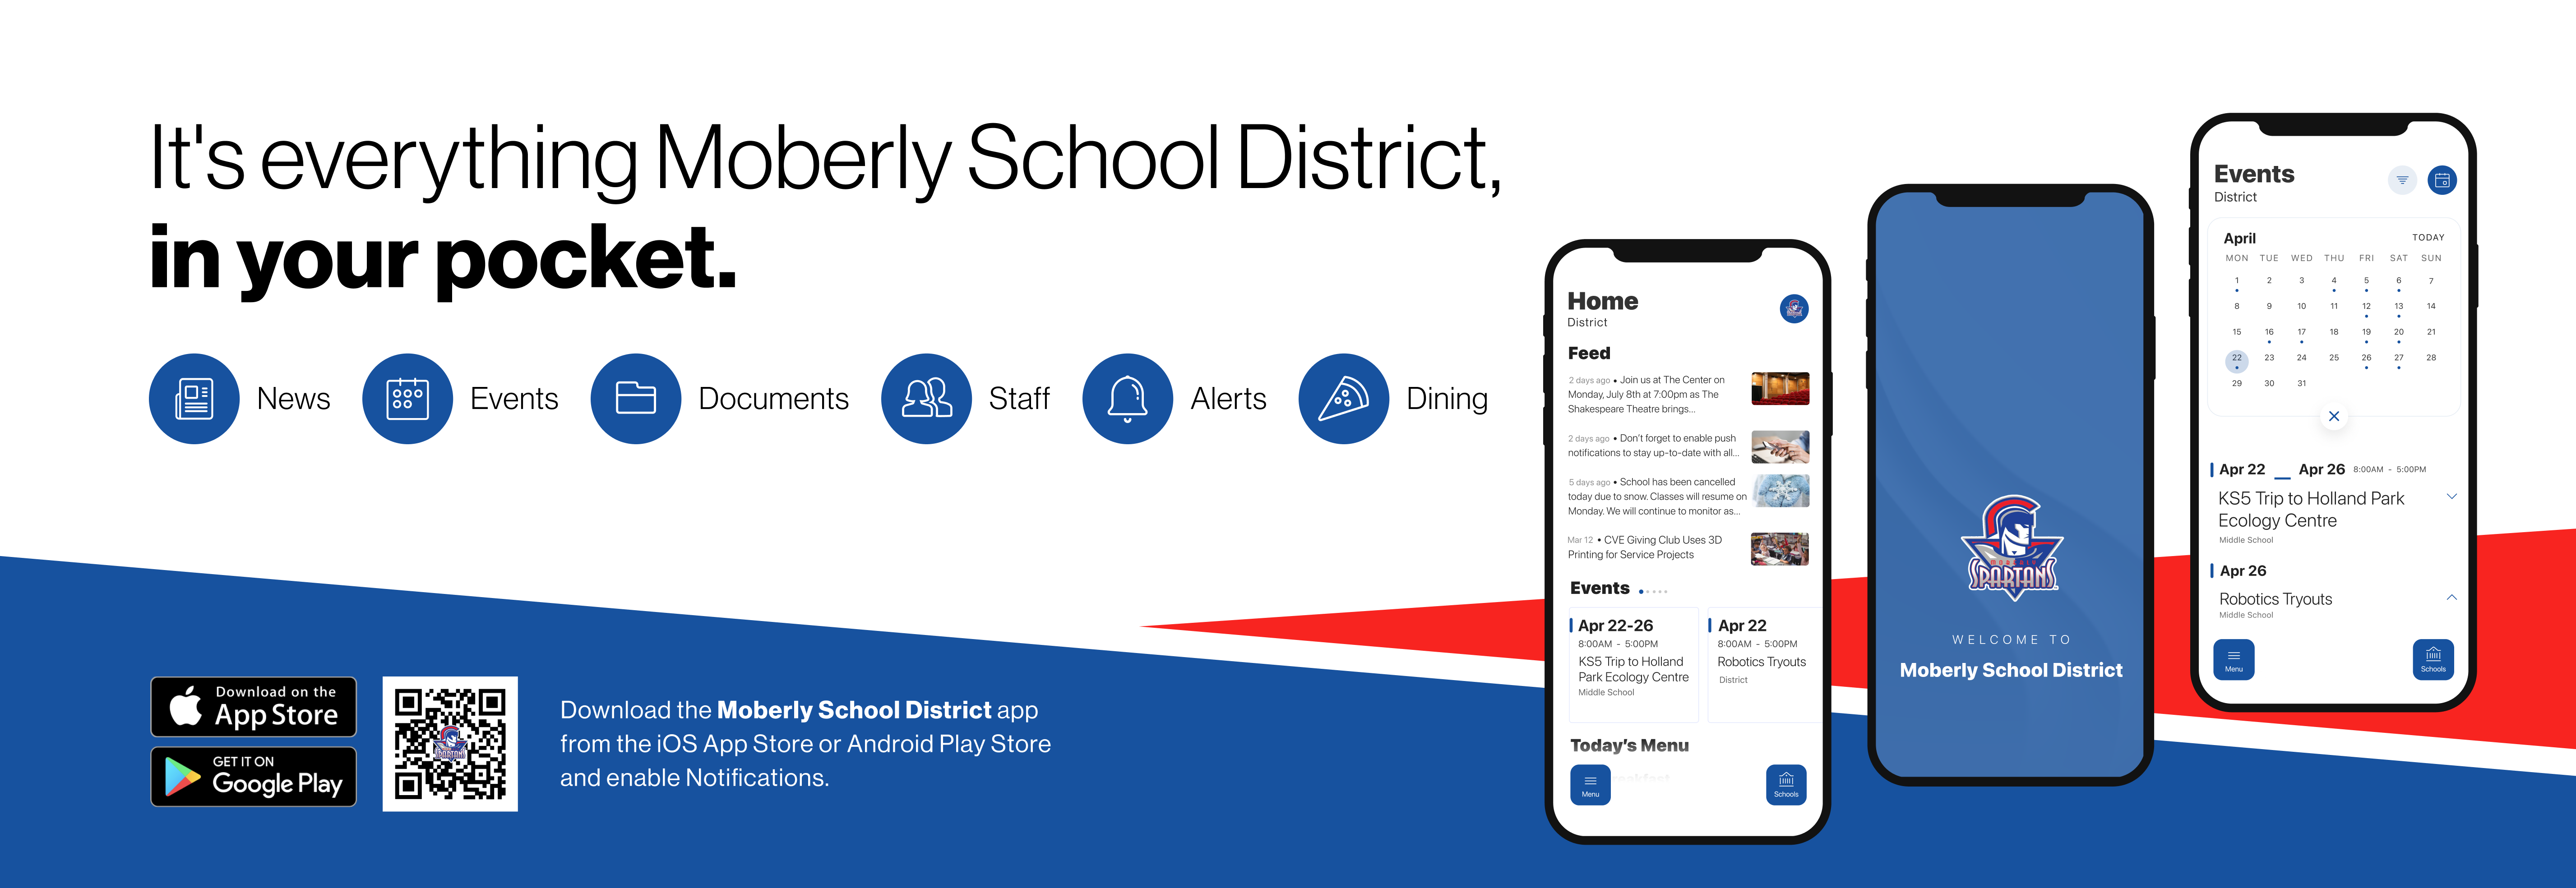 Moberly School District App: Its everything Moberly School District in your pocket. 